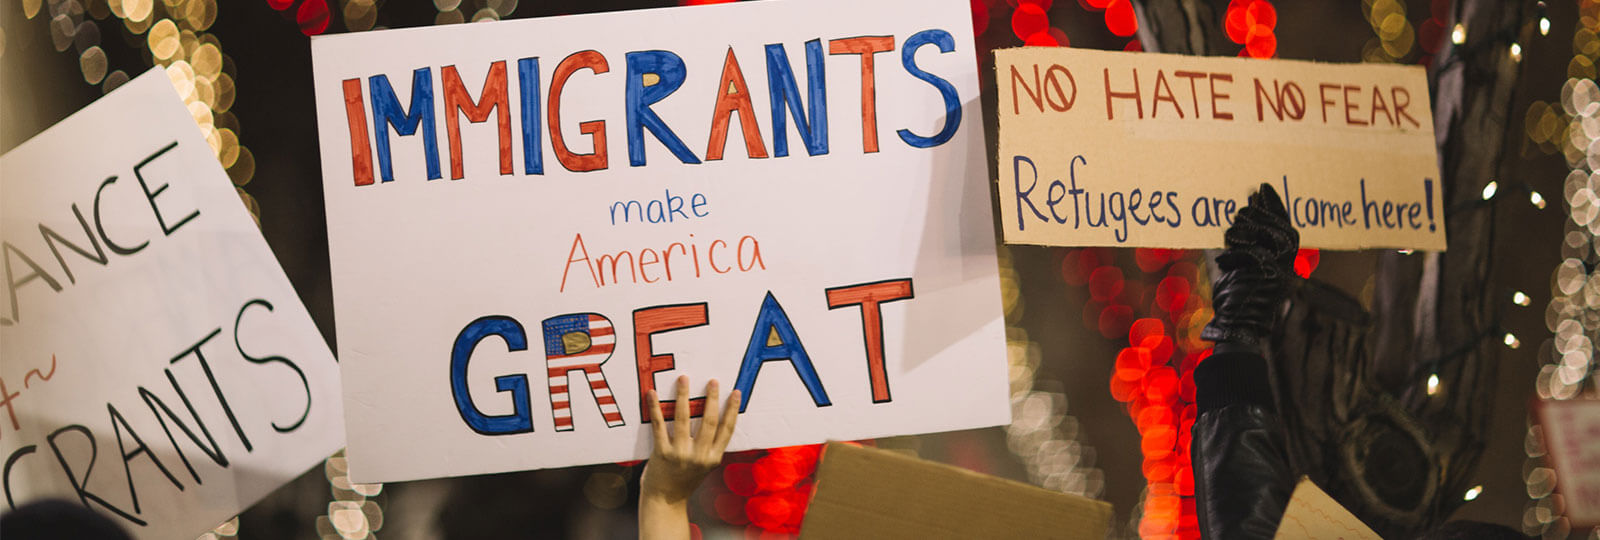 Signs from a protest, and two say "Immigrants Make America Great" and "No Hate No Fear Refugees are Welcome Here"